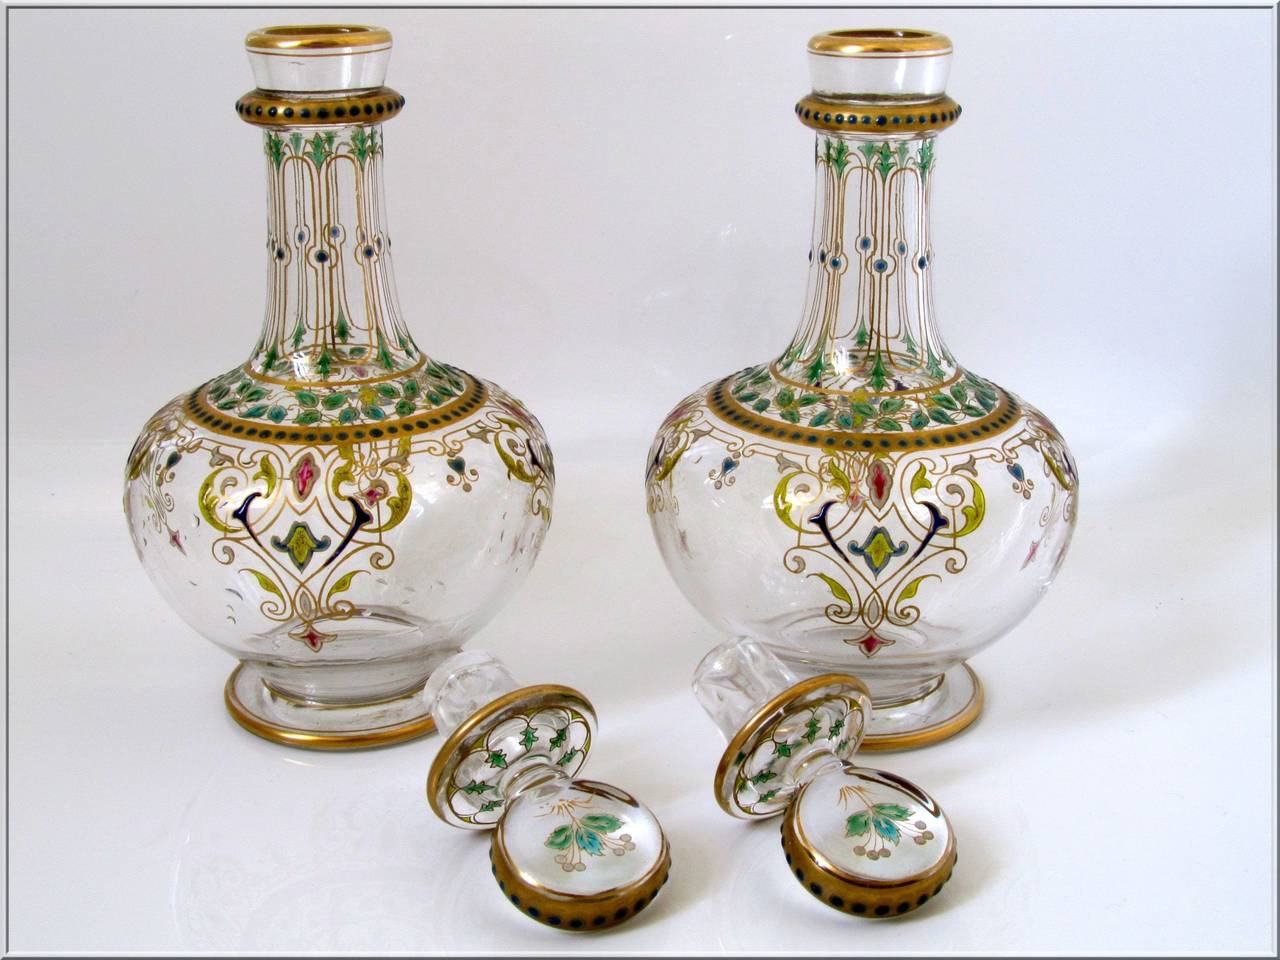 Napoleon III 1870s Exceptional French Baccarat Enameled Crystal Liquor Service